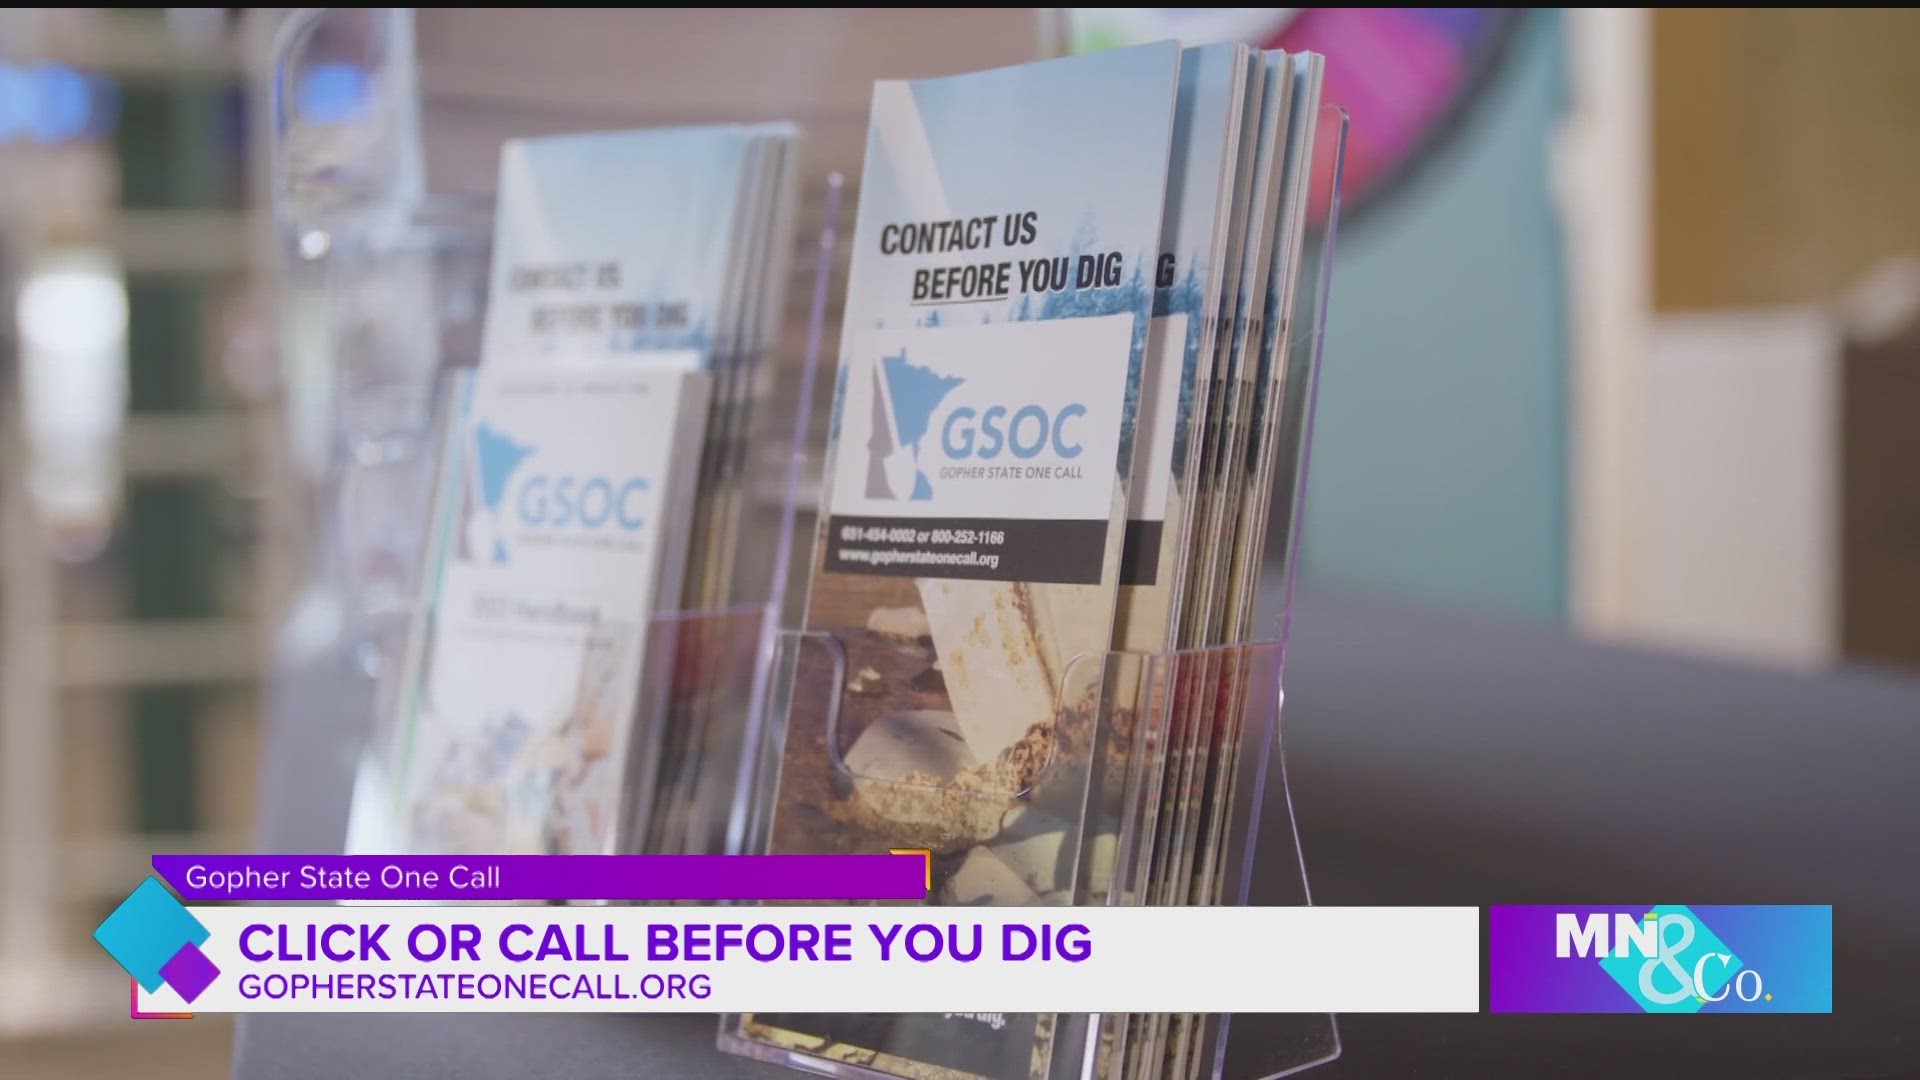 Gopher State One Call joins Minnesota and Company to discuss the importance of clicking and calling before you dig.